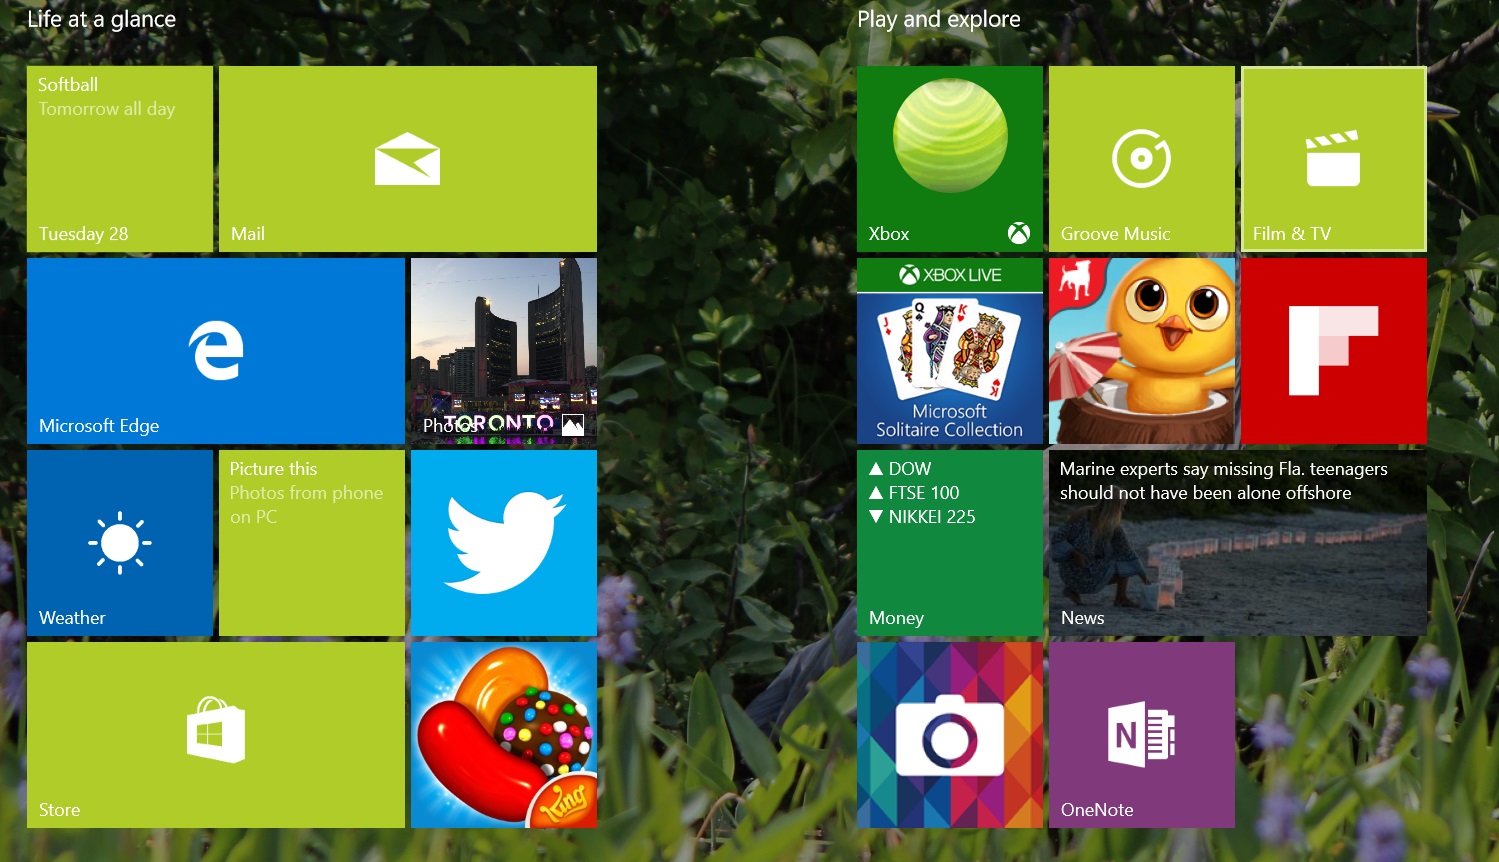 Windows 8 users will be familiar with this menu, now reserved for tablet mode.